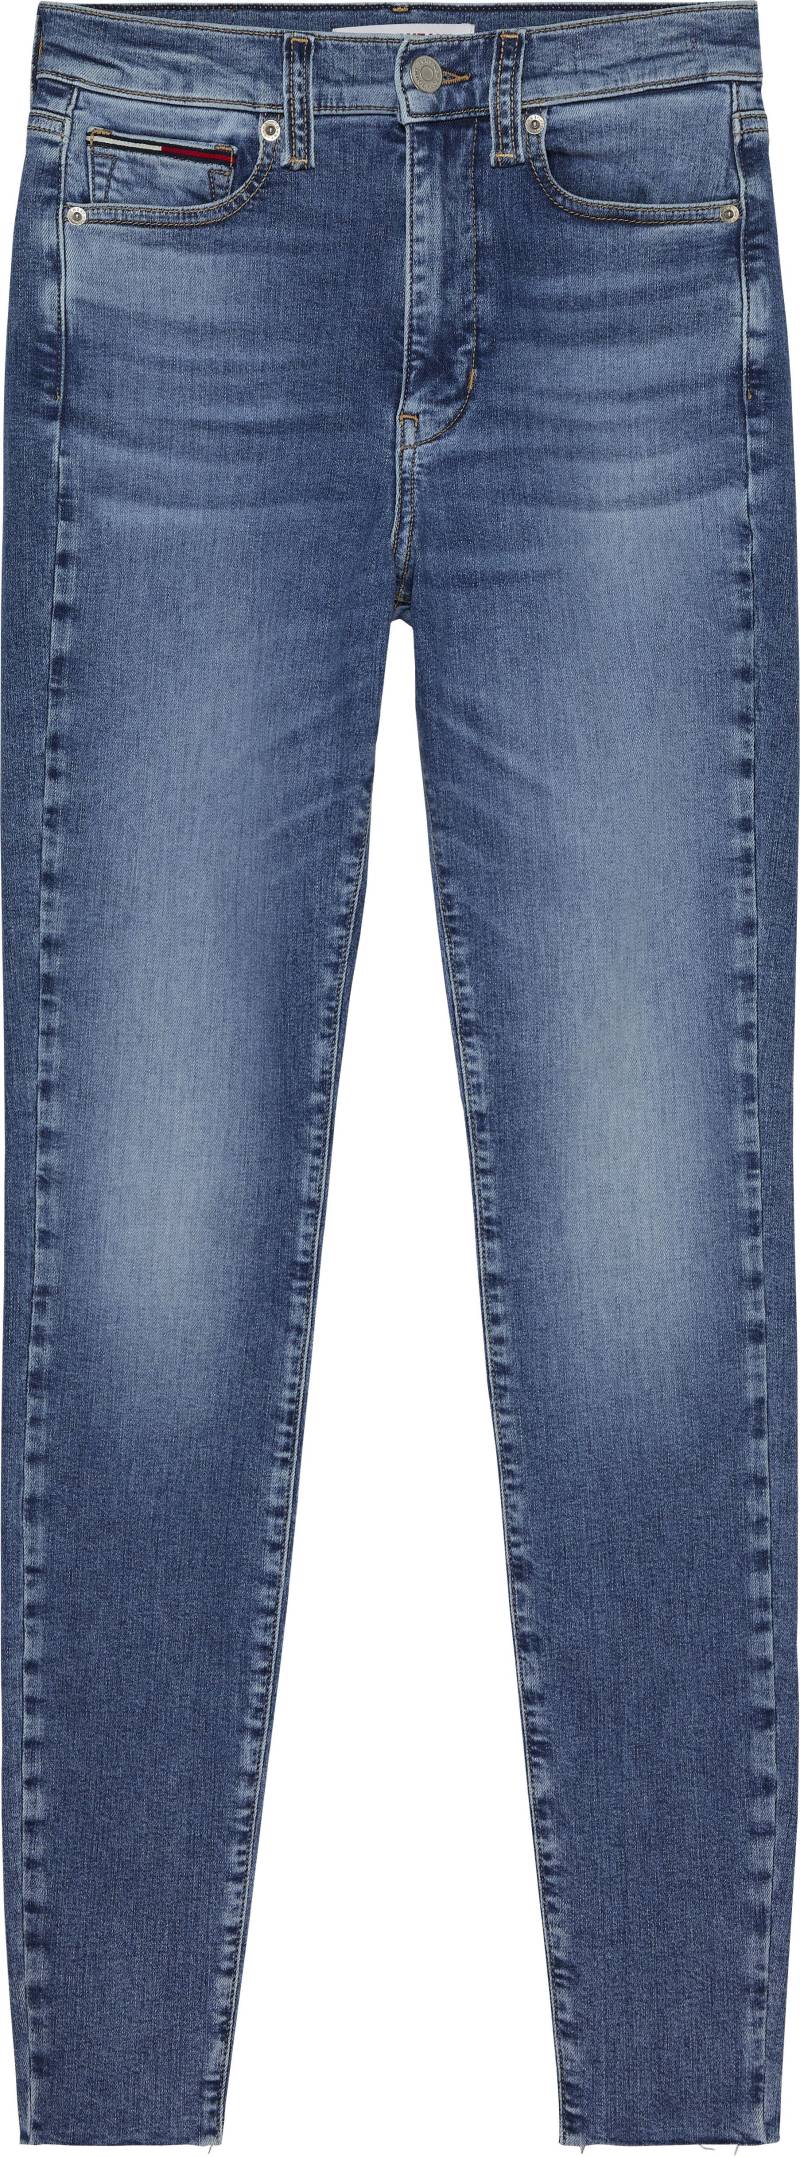 Tommy Jeans Skinny-fit-Jeans »Jeans SYLVIA HR SSKN CG4«, mit Logobadge und Labelflags von Tommy Jeans